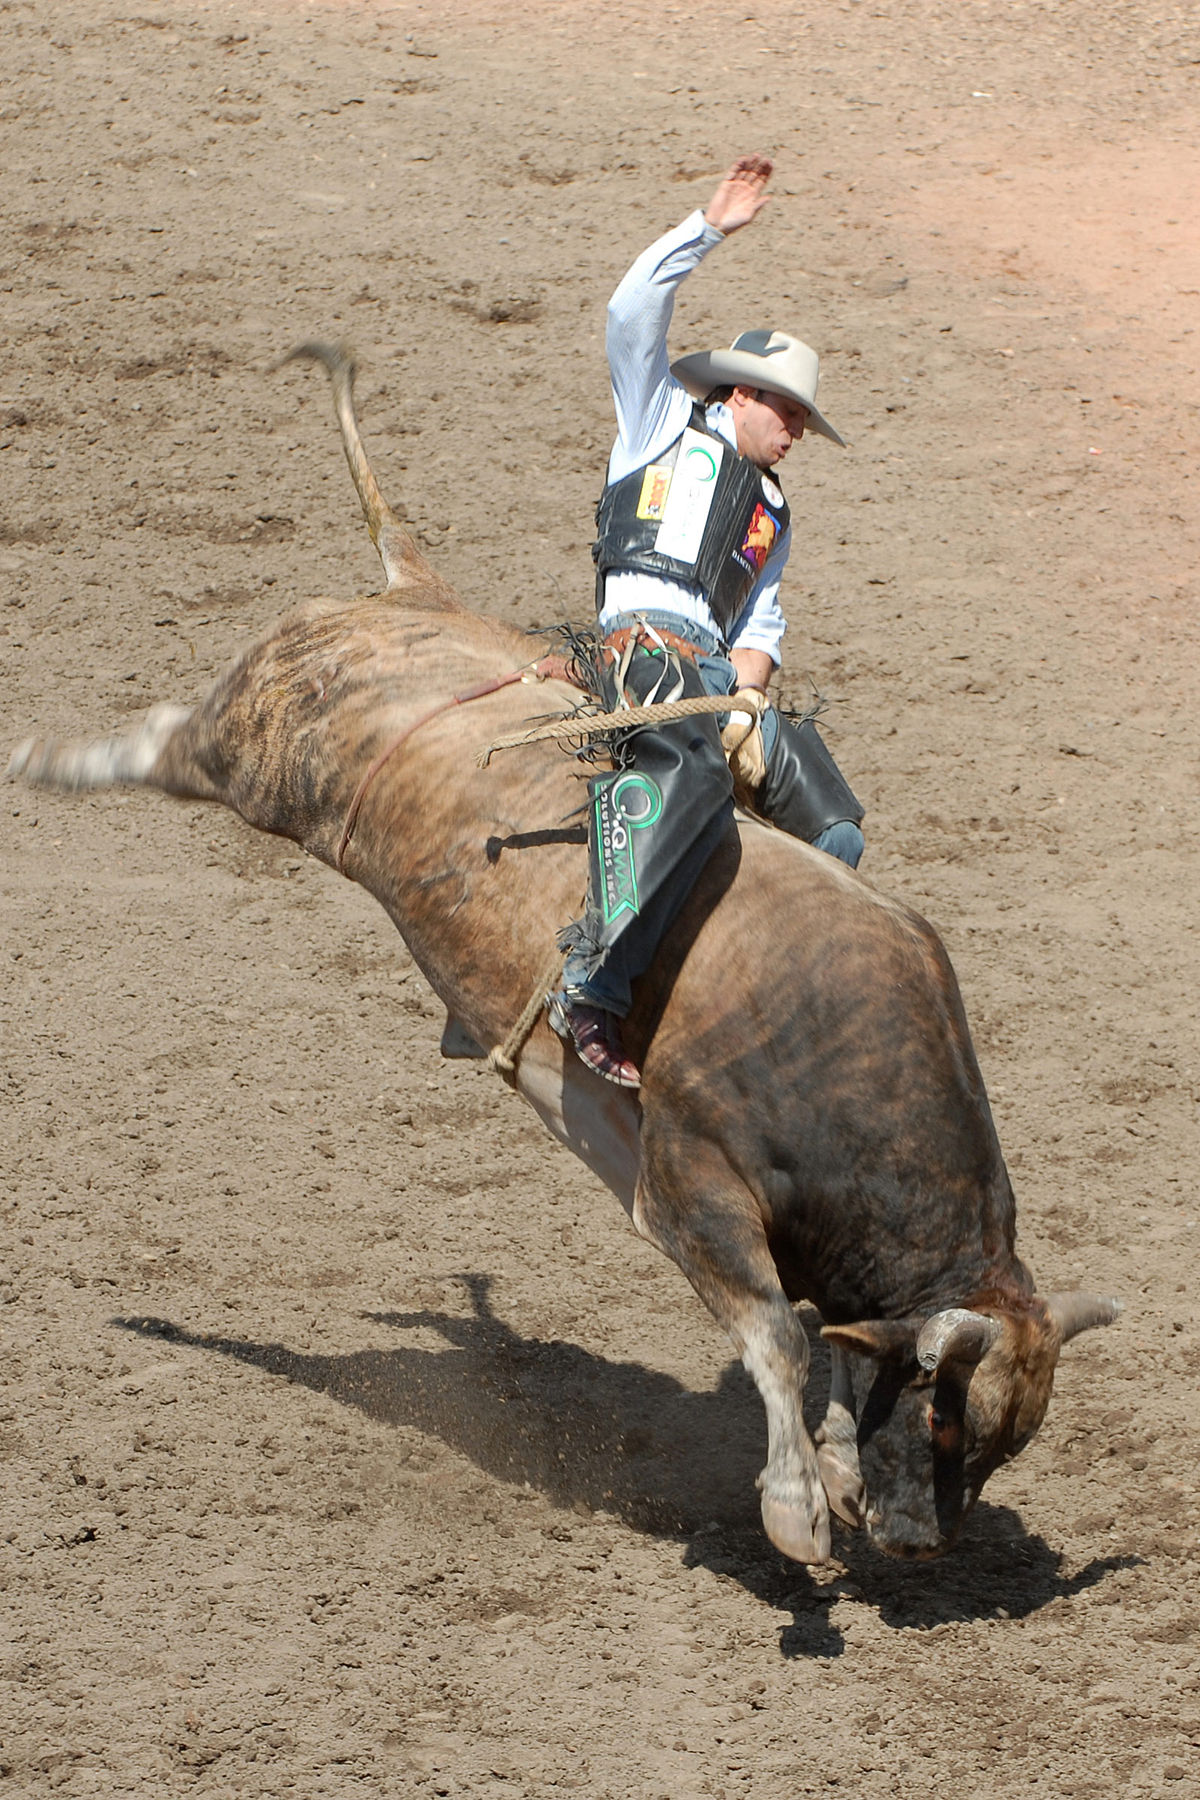 Competitive Rodeo – What Is The Best Music to Practice Rodeo Riding?